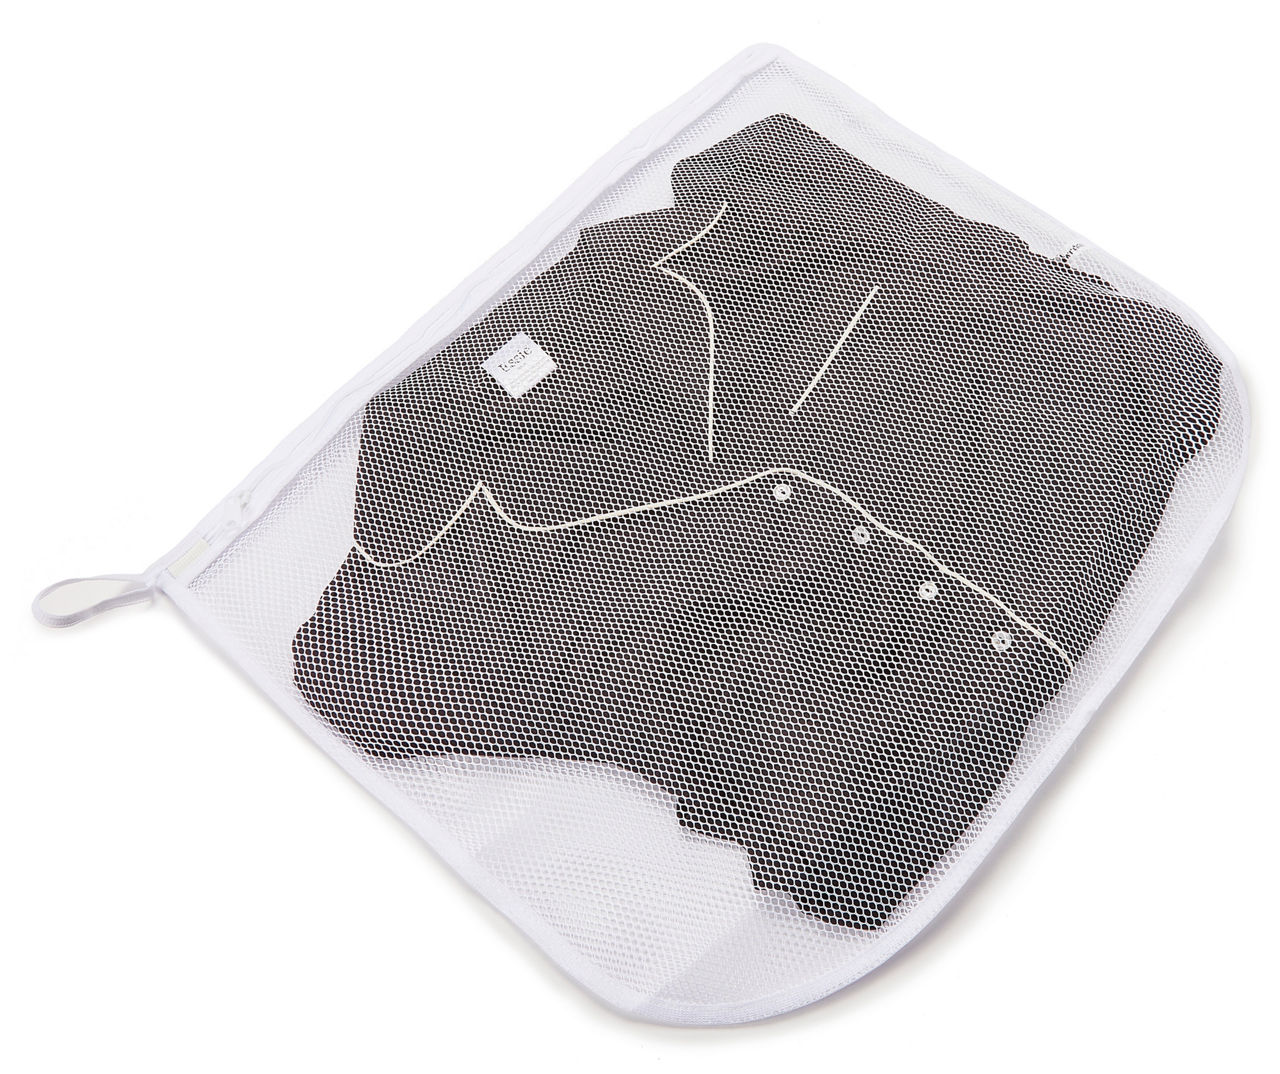 Save on Whitmor Mesh Wash Bags Order Online Delivery